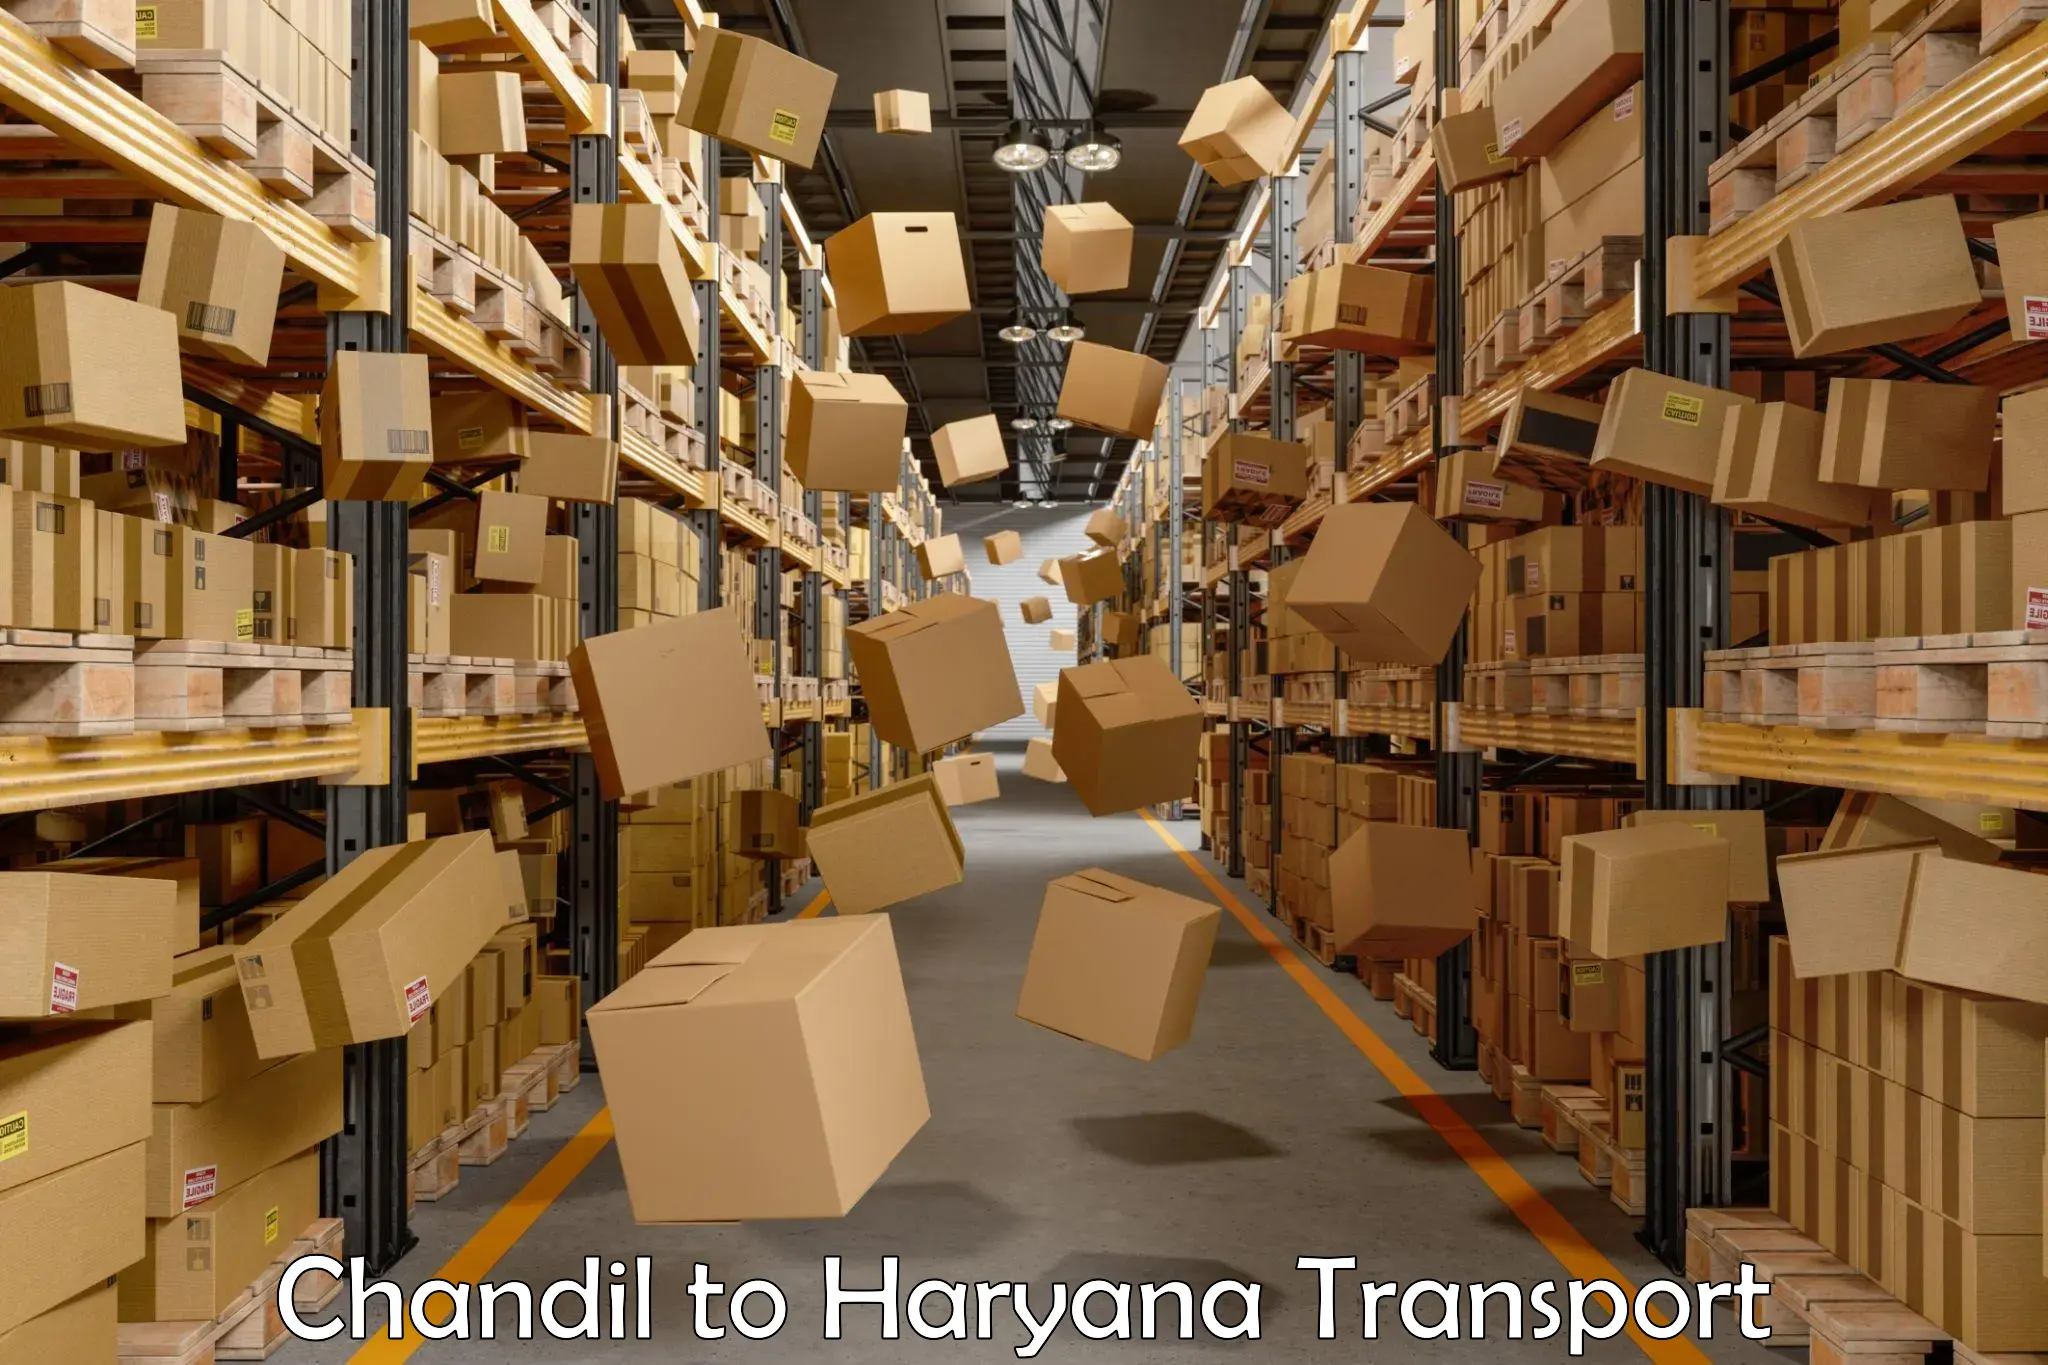 Truck transport companies in India Chandil to Sonipat